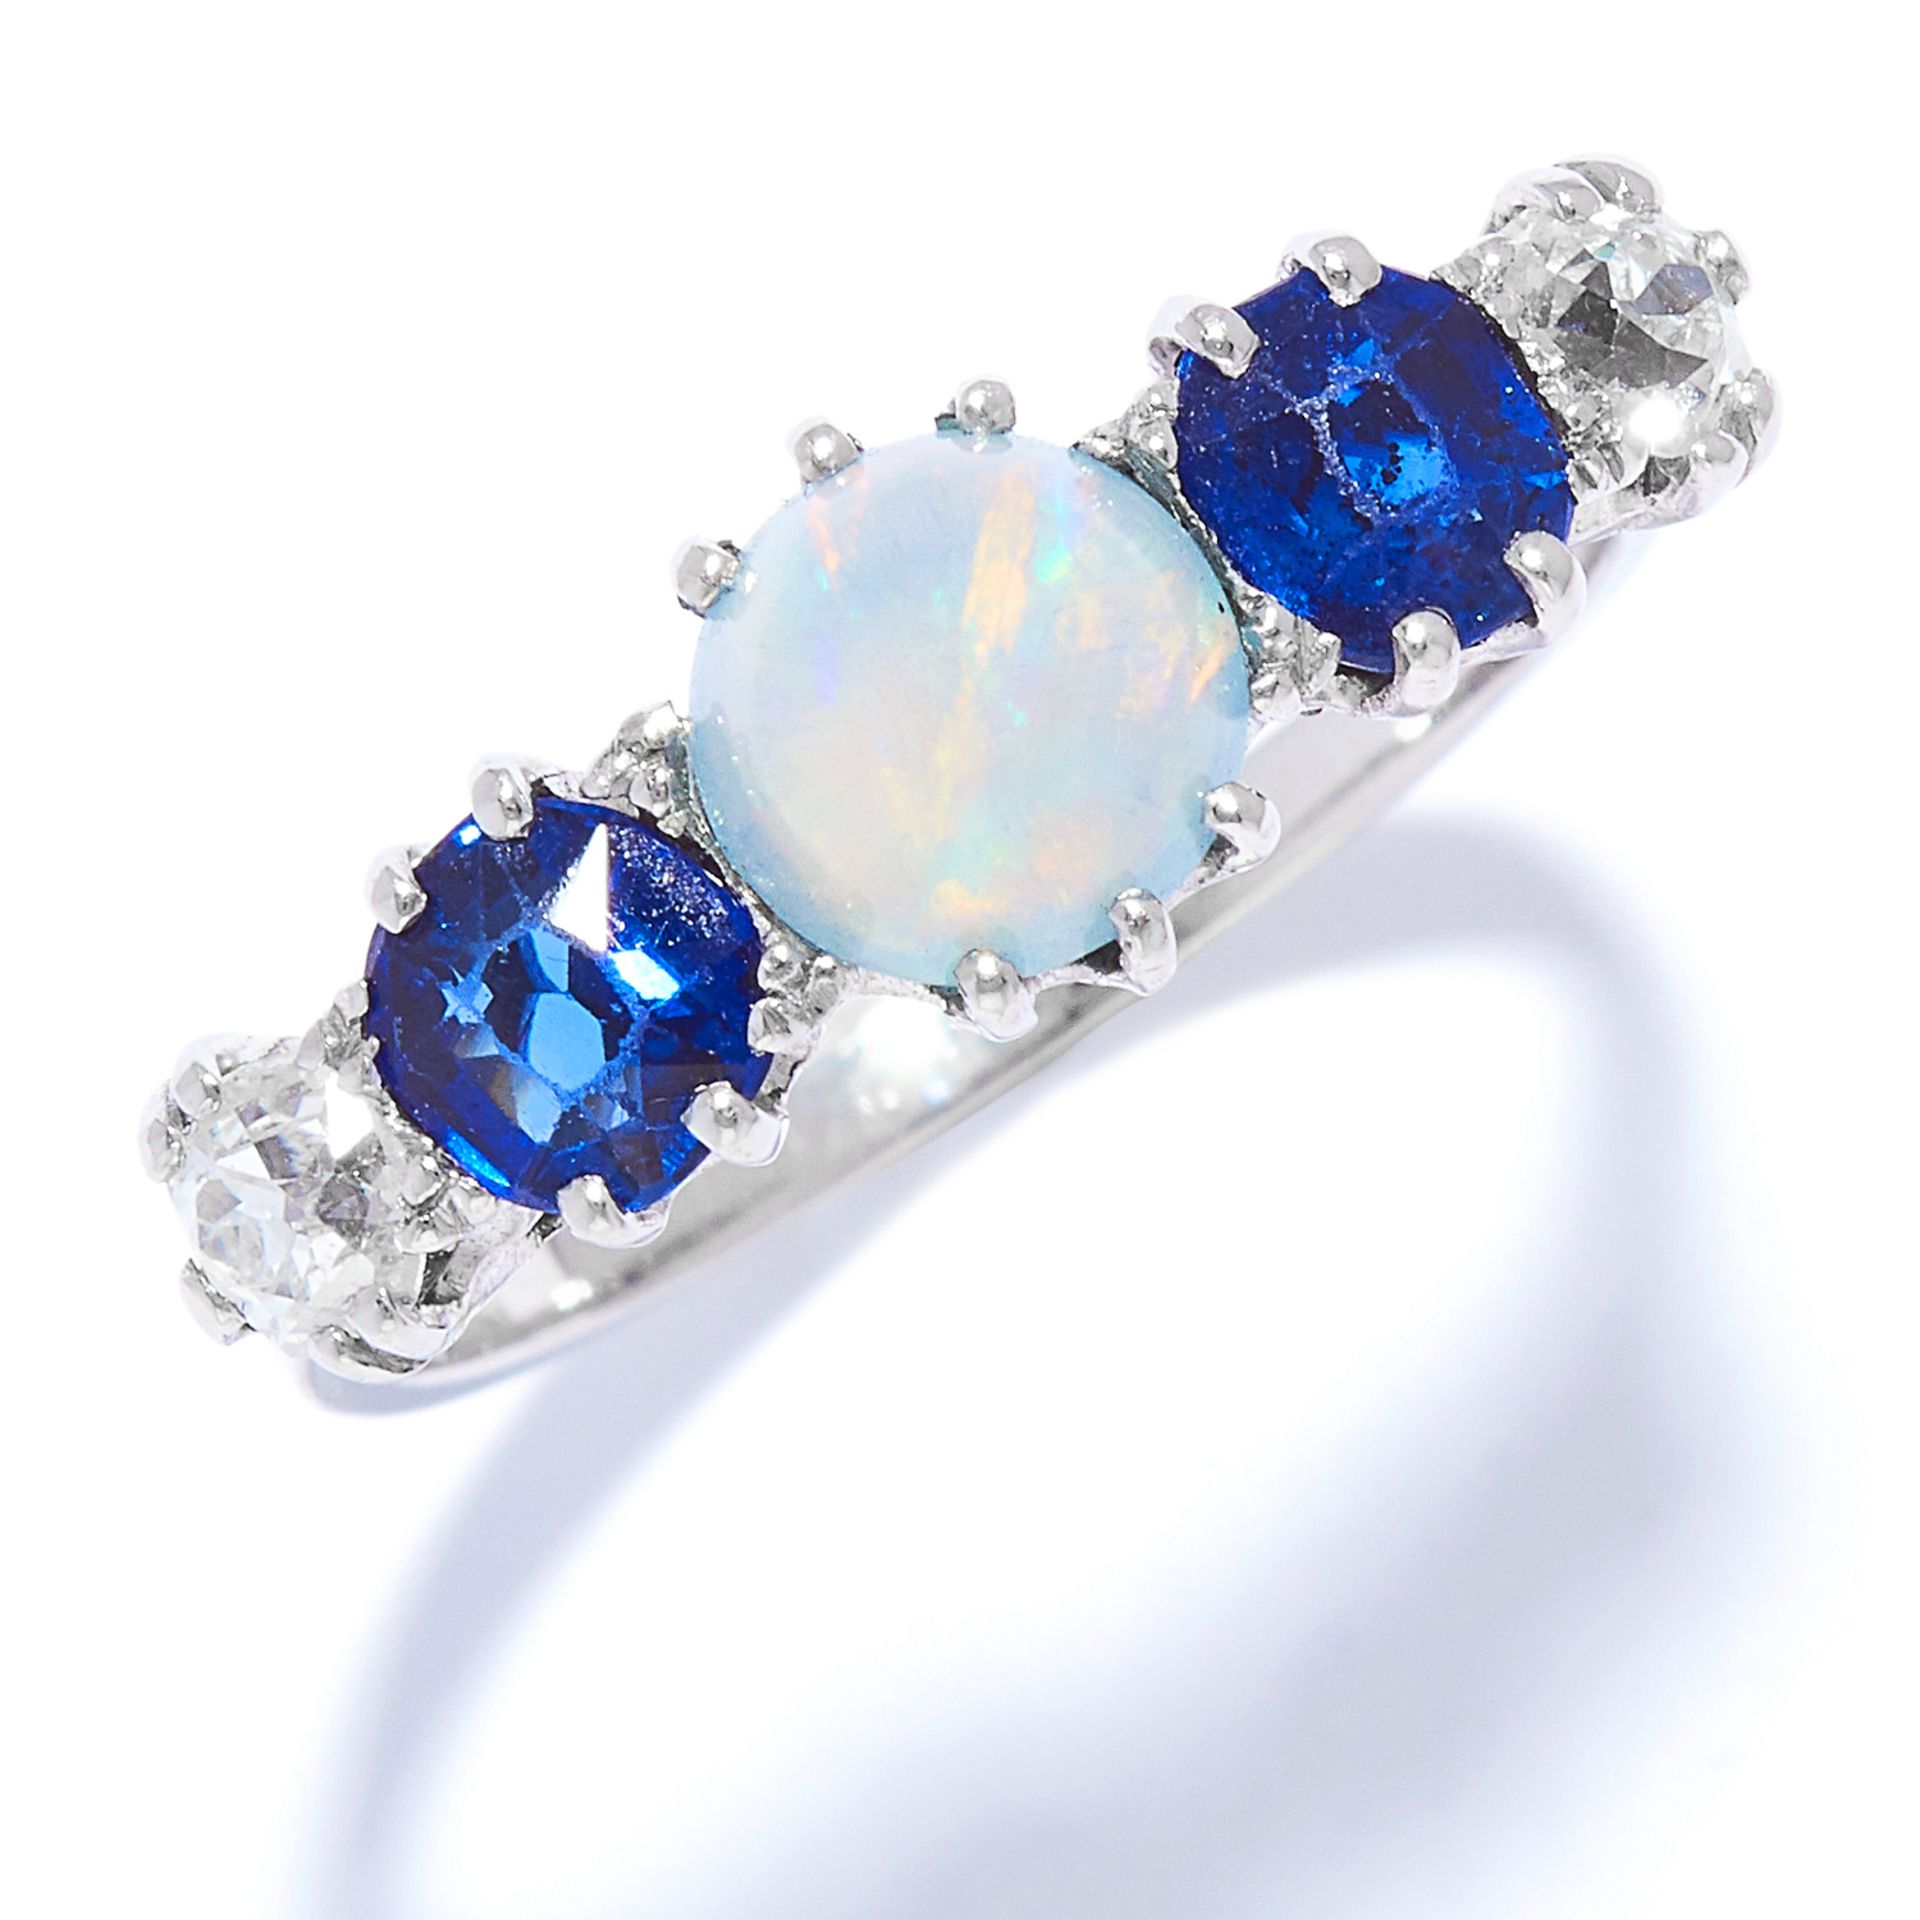 AN OPAL, SAPPHIRE AND DIAMOND DRESS RING in white gold or platinum, set with a cabochon opal between